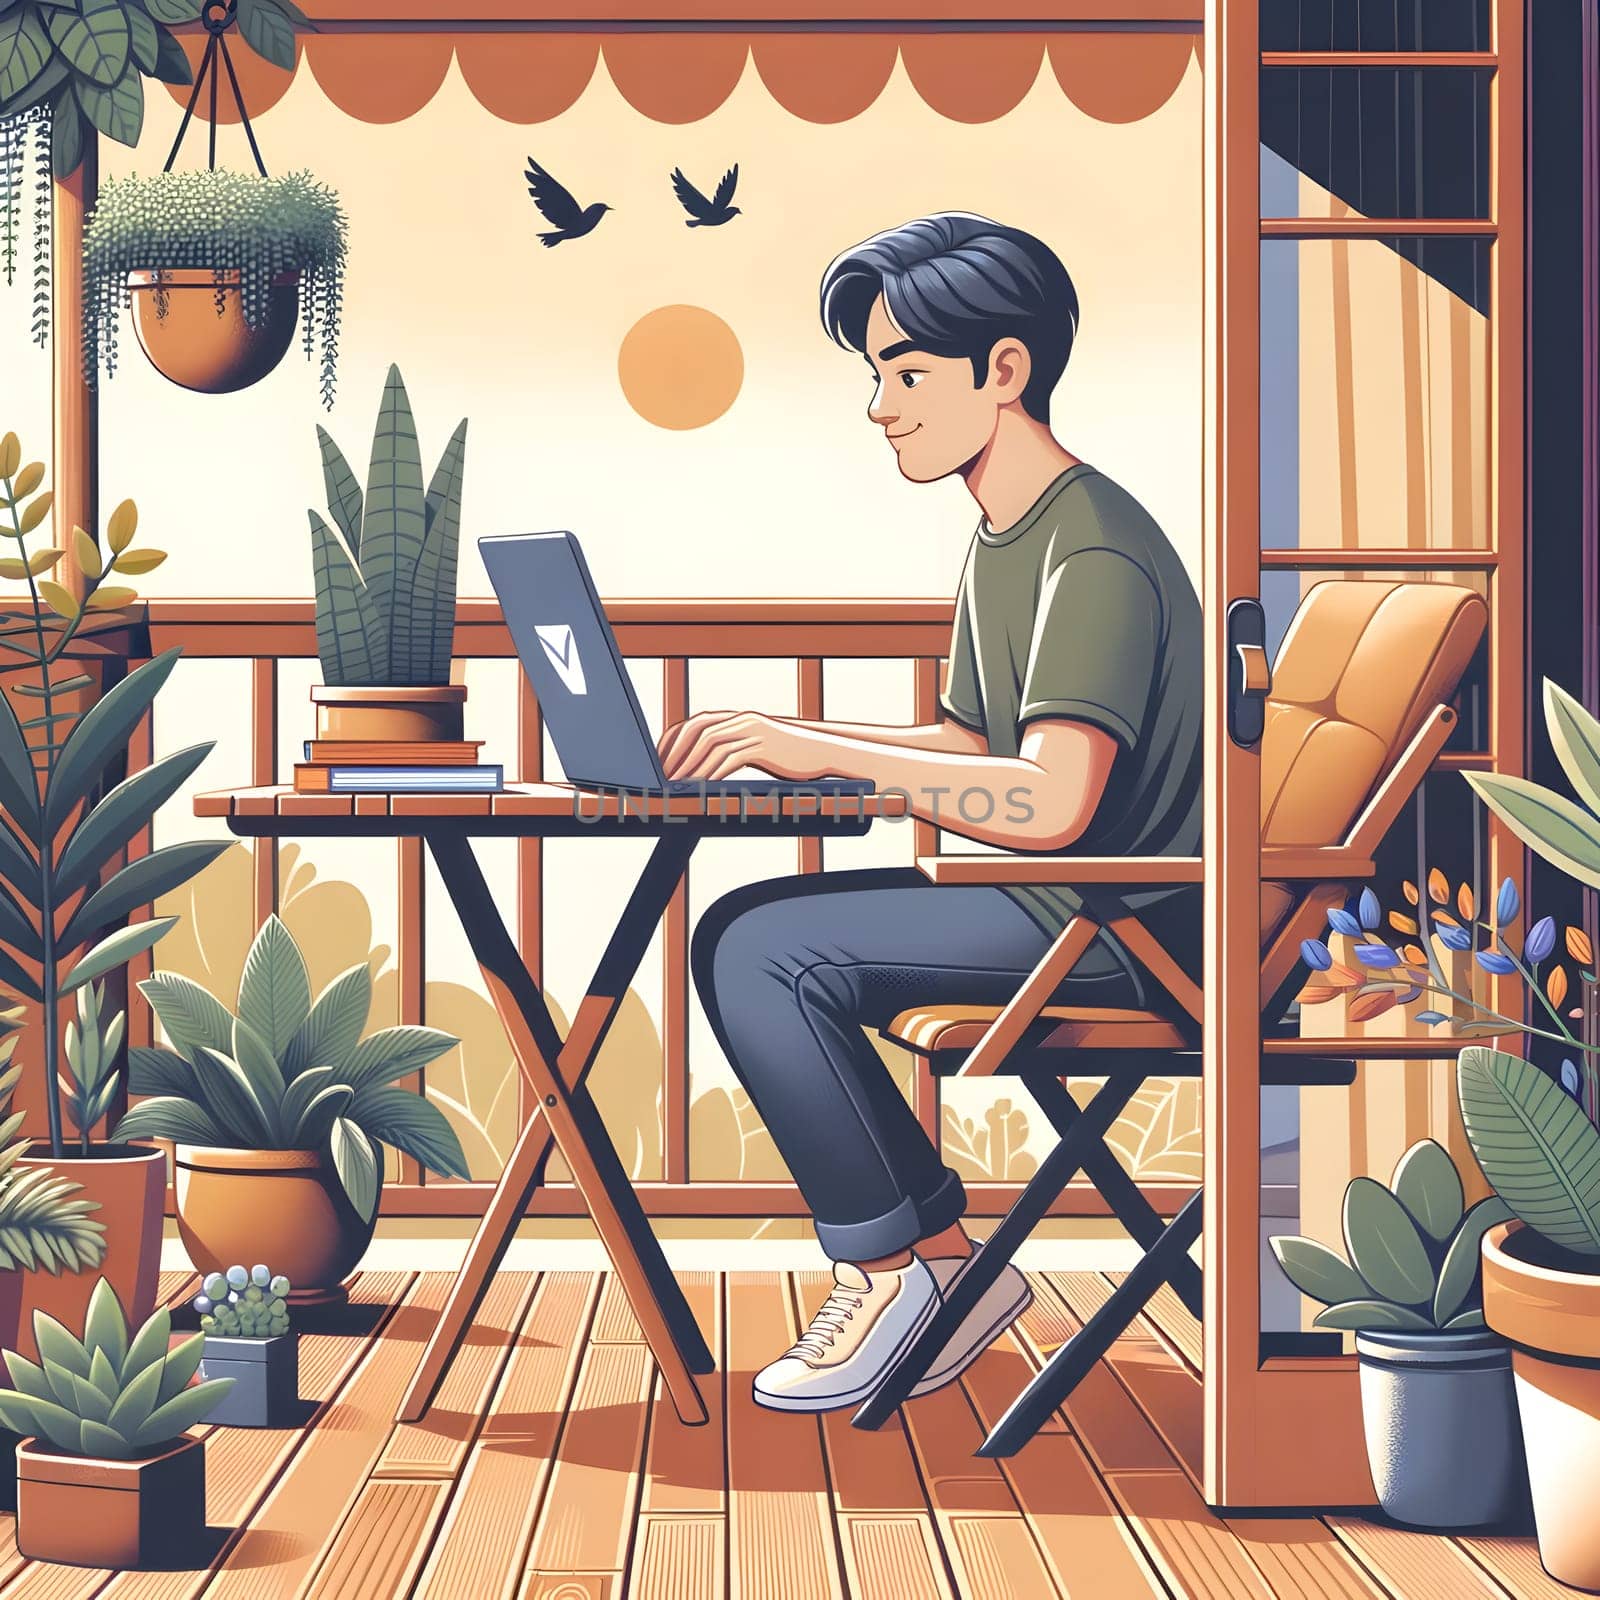 A man works on his laptop on a patio surrounded by plants.